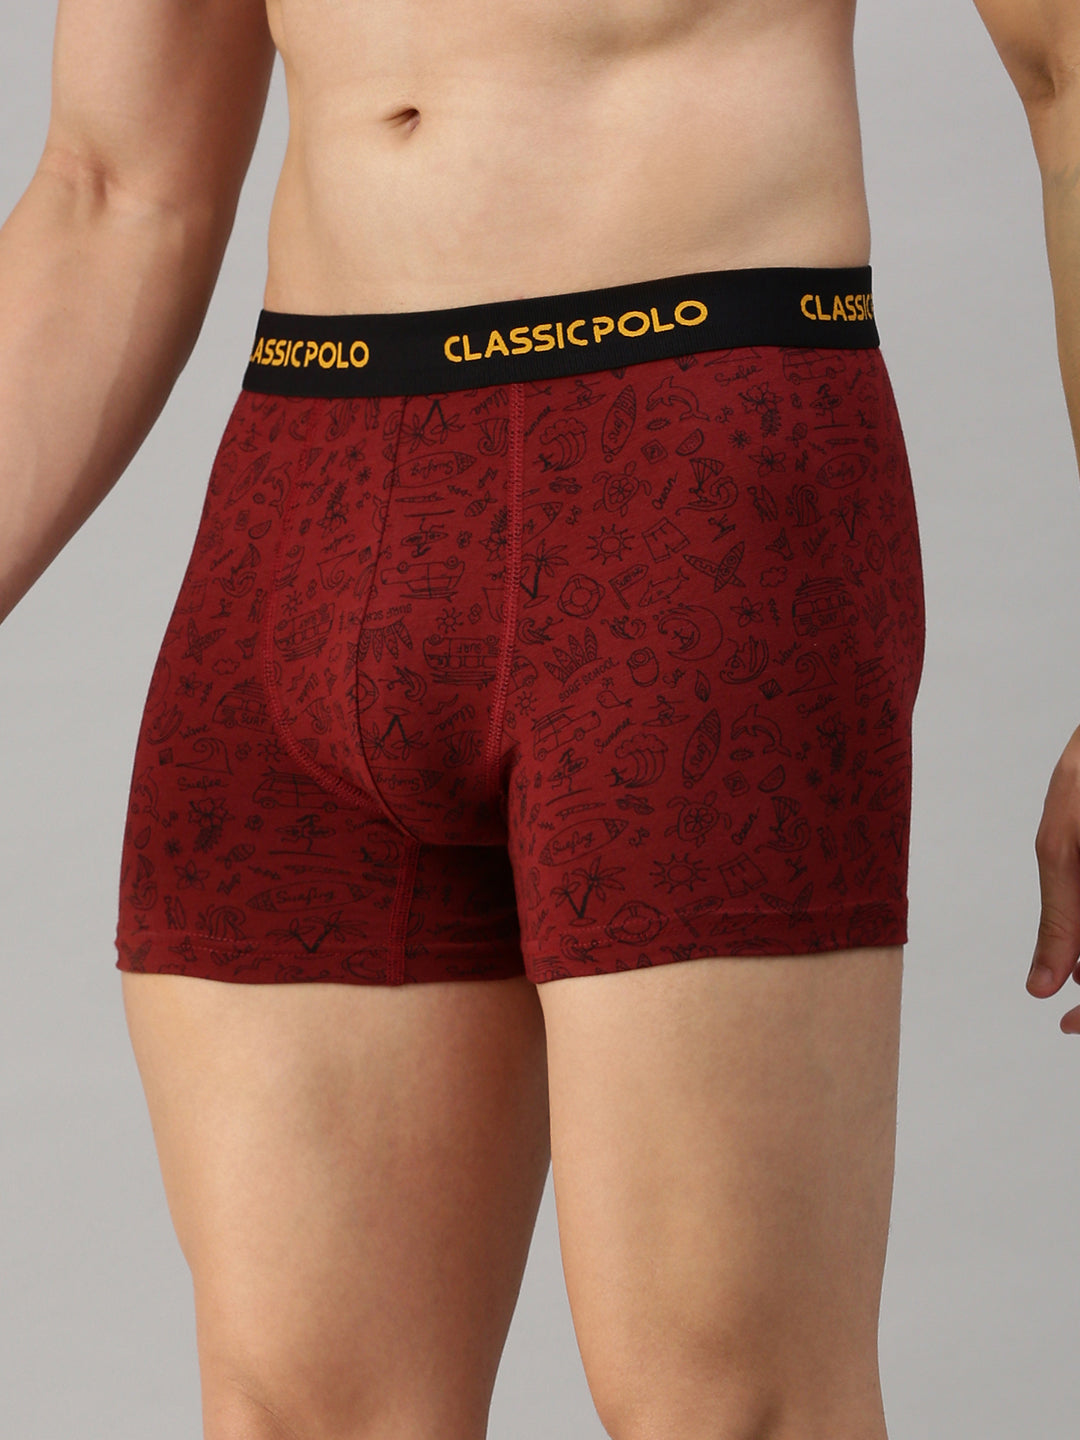 Classic Polo Men's Modal Printed Trunk | Glance - Red